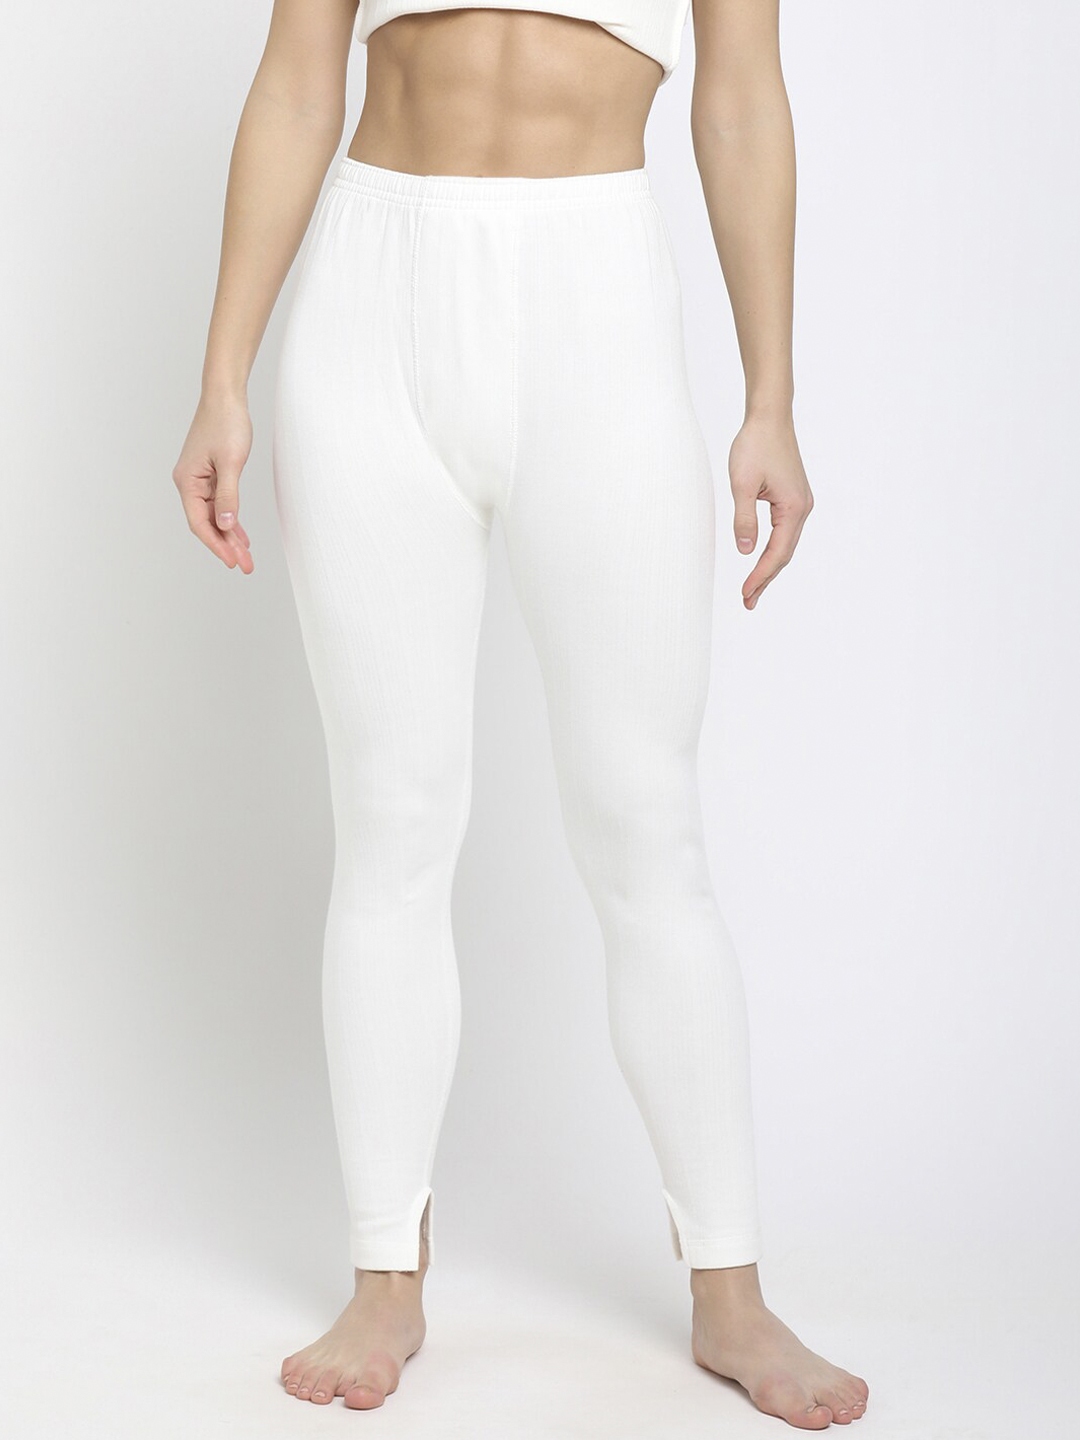 Buy BODYCARE Women Off White Solid Cotton Blend Thermal Leggings